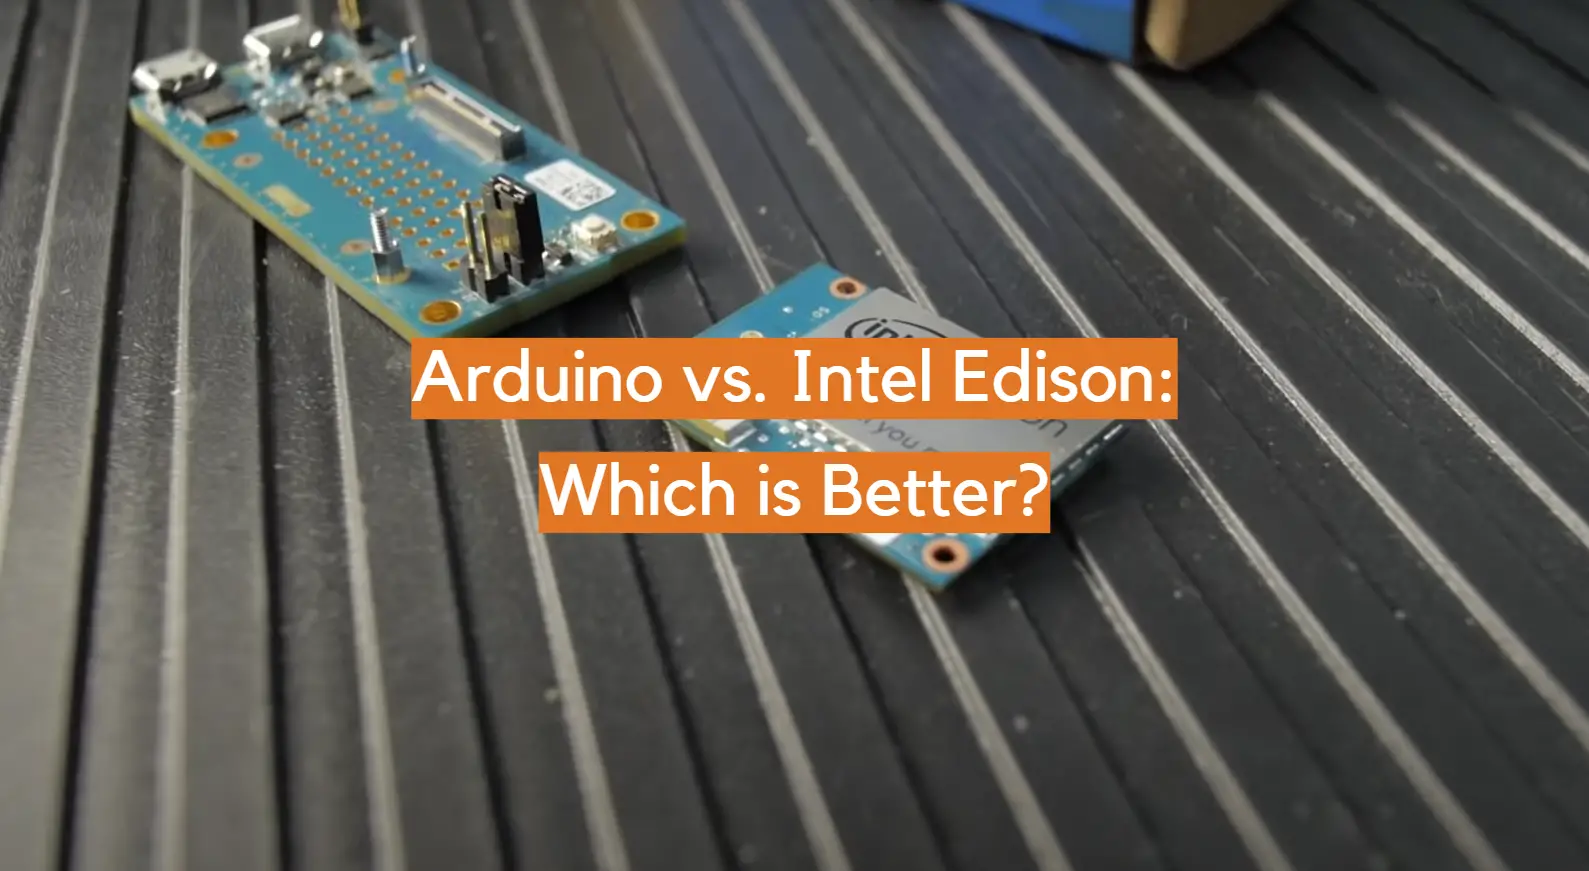 Arduino vs. Intel Edison: Which is Better?